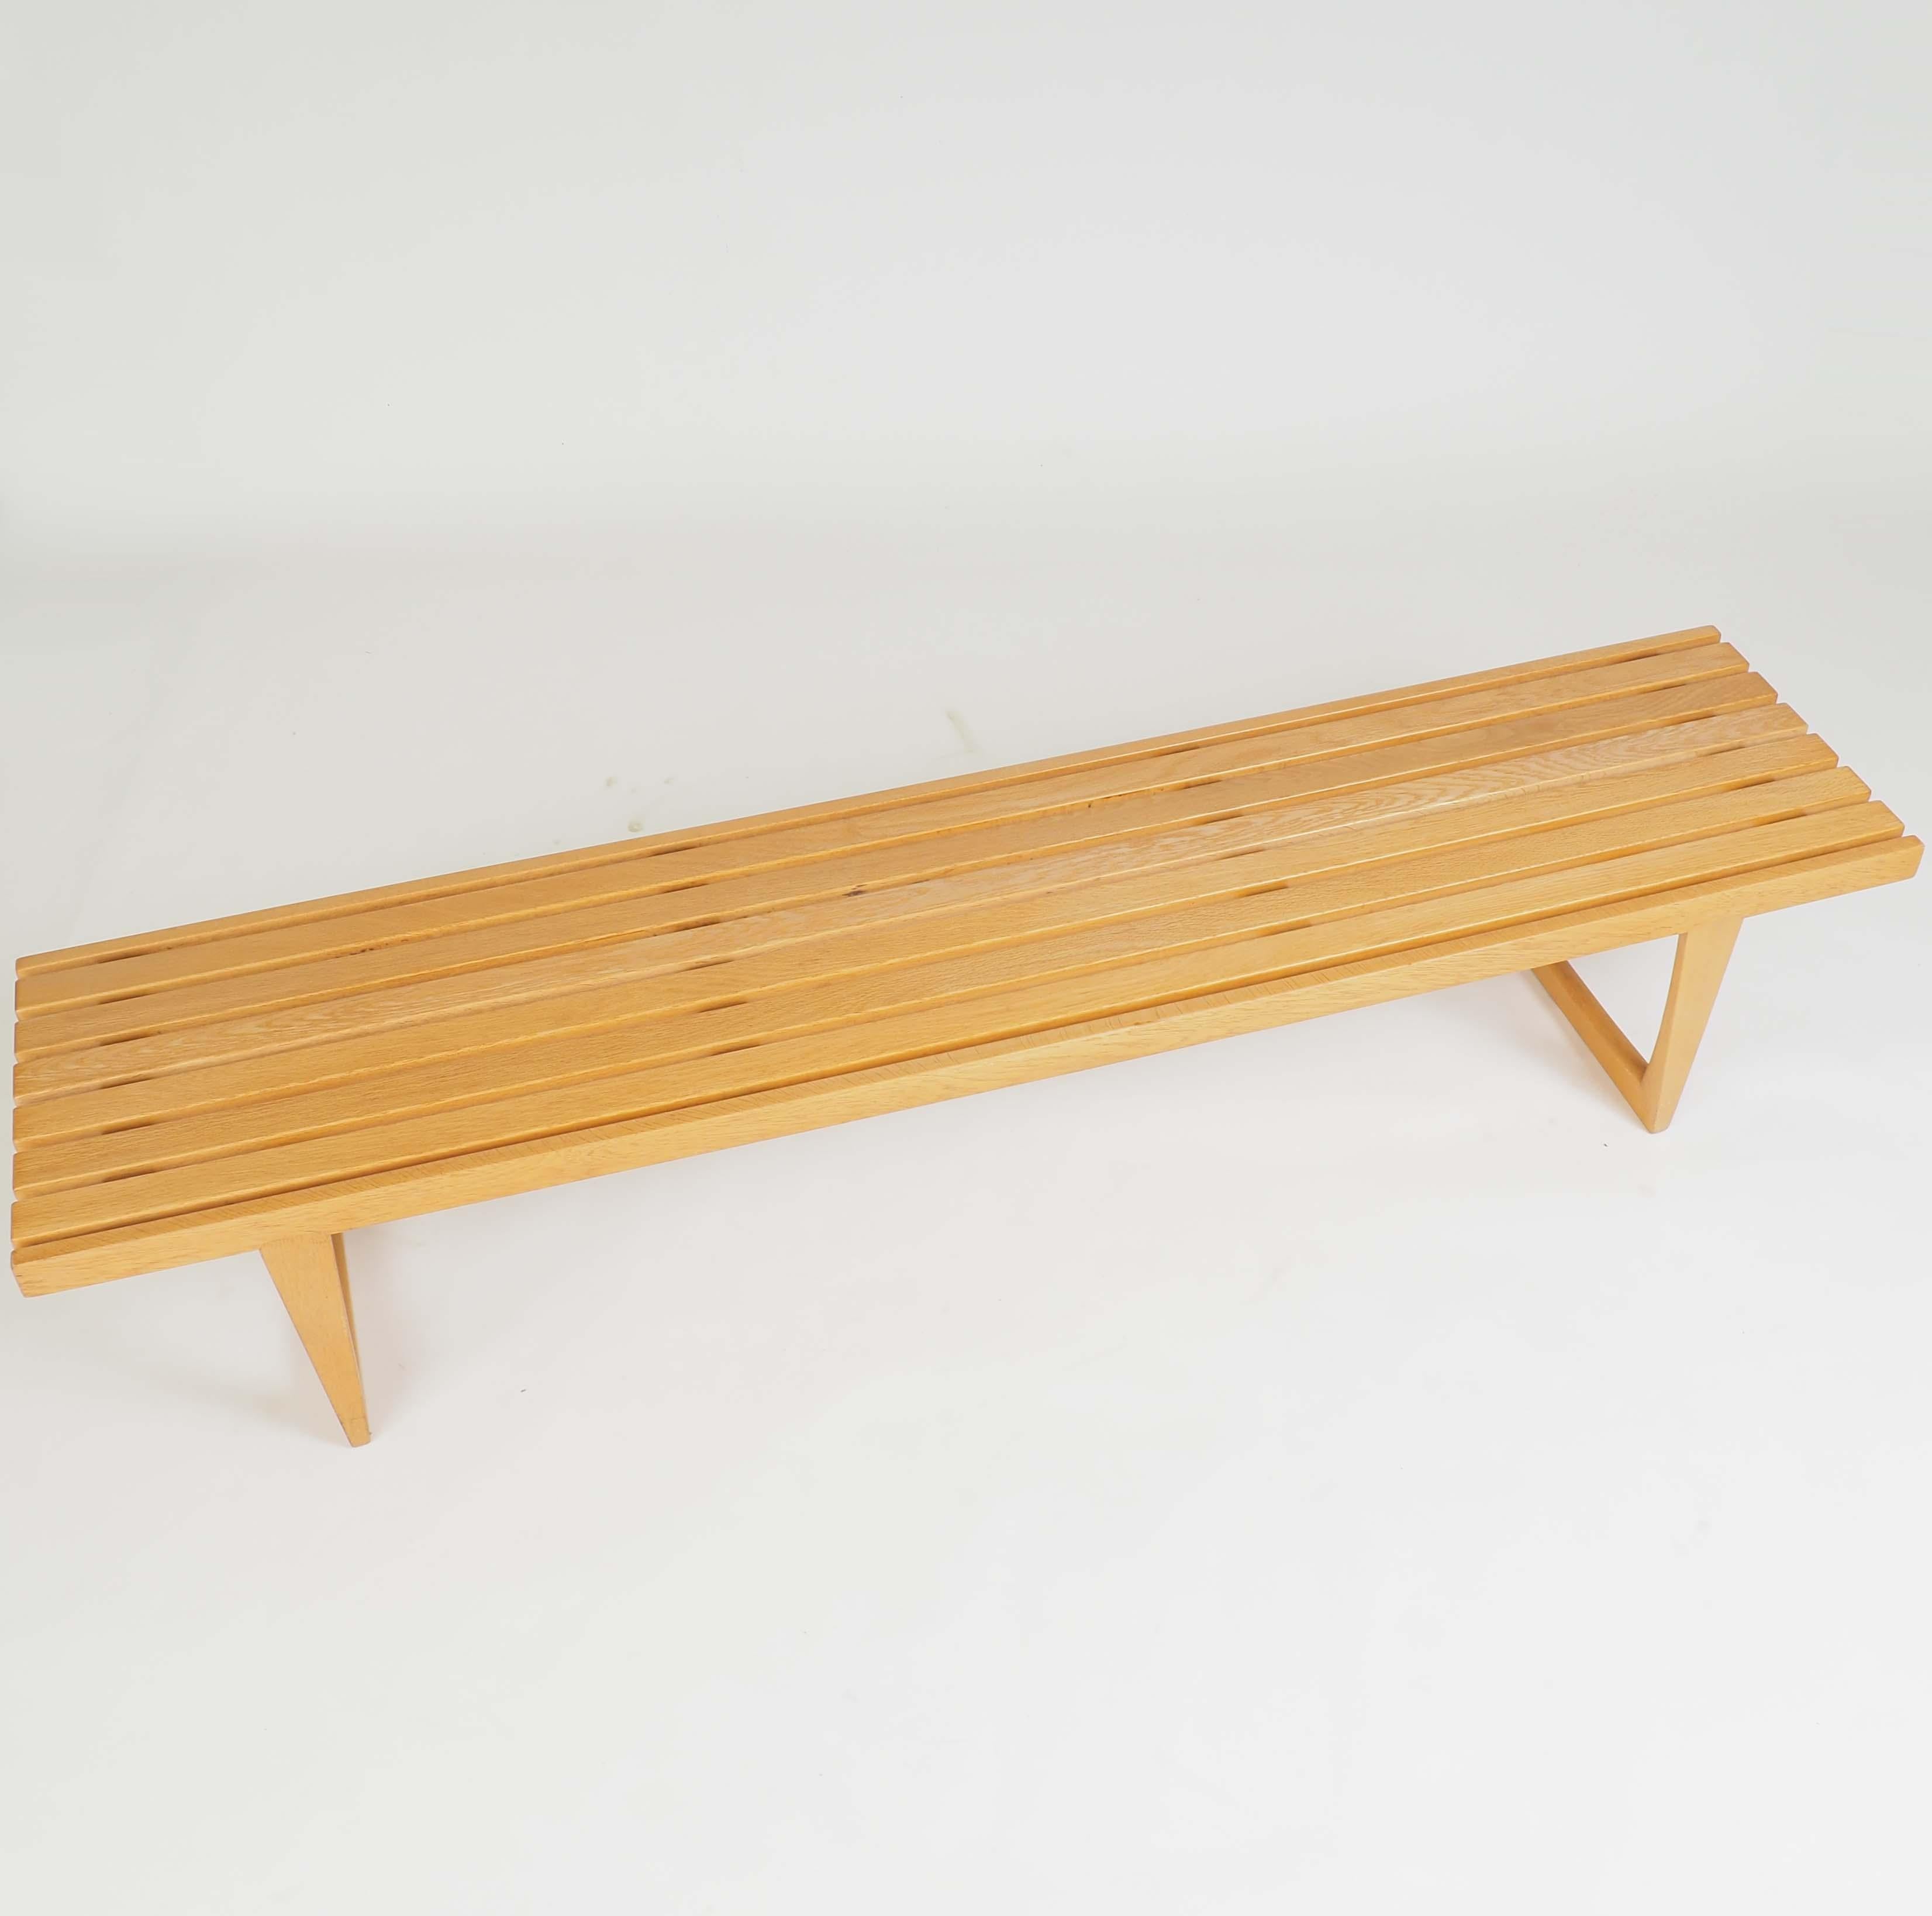 Tokyo, a bench in massive oak for sitting or for using as a table. Made by NK (Nordiska Kompaniet),
the leading warehouse in Stockholm. Designed by Yngvar Sandström and part of a series called 